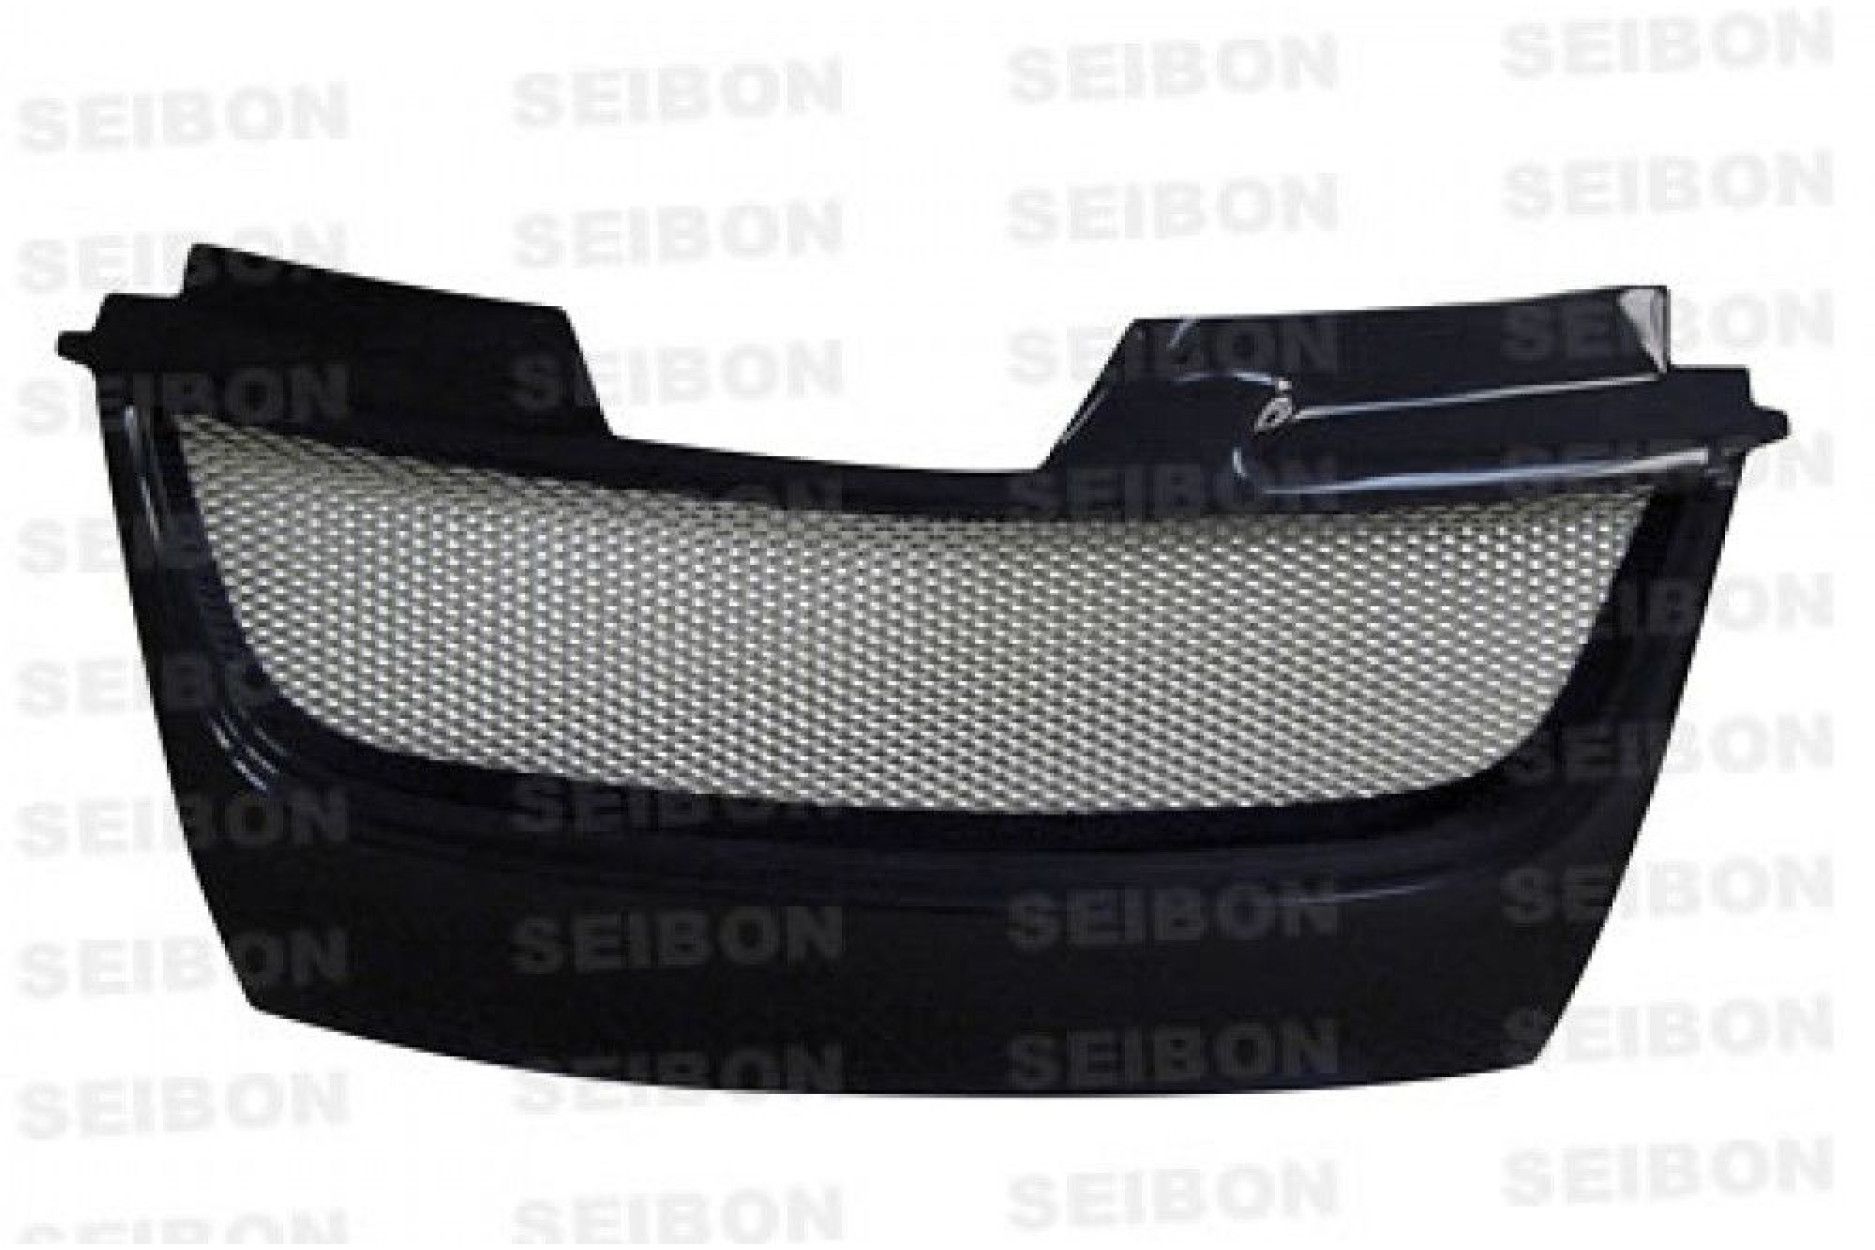 Seibon carbon front grille for VW Golf 5 GTI 2006 - 2009 TD-Style